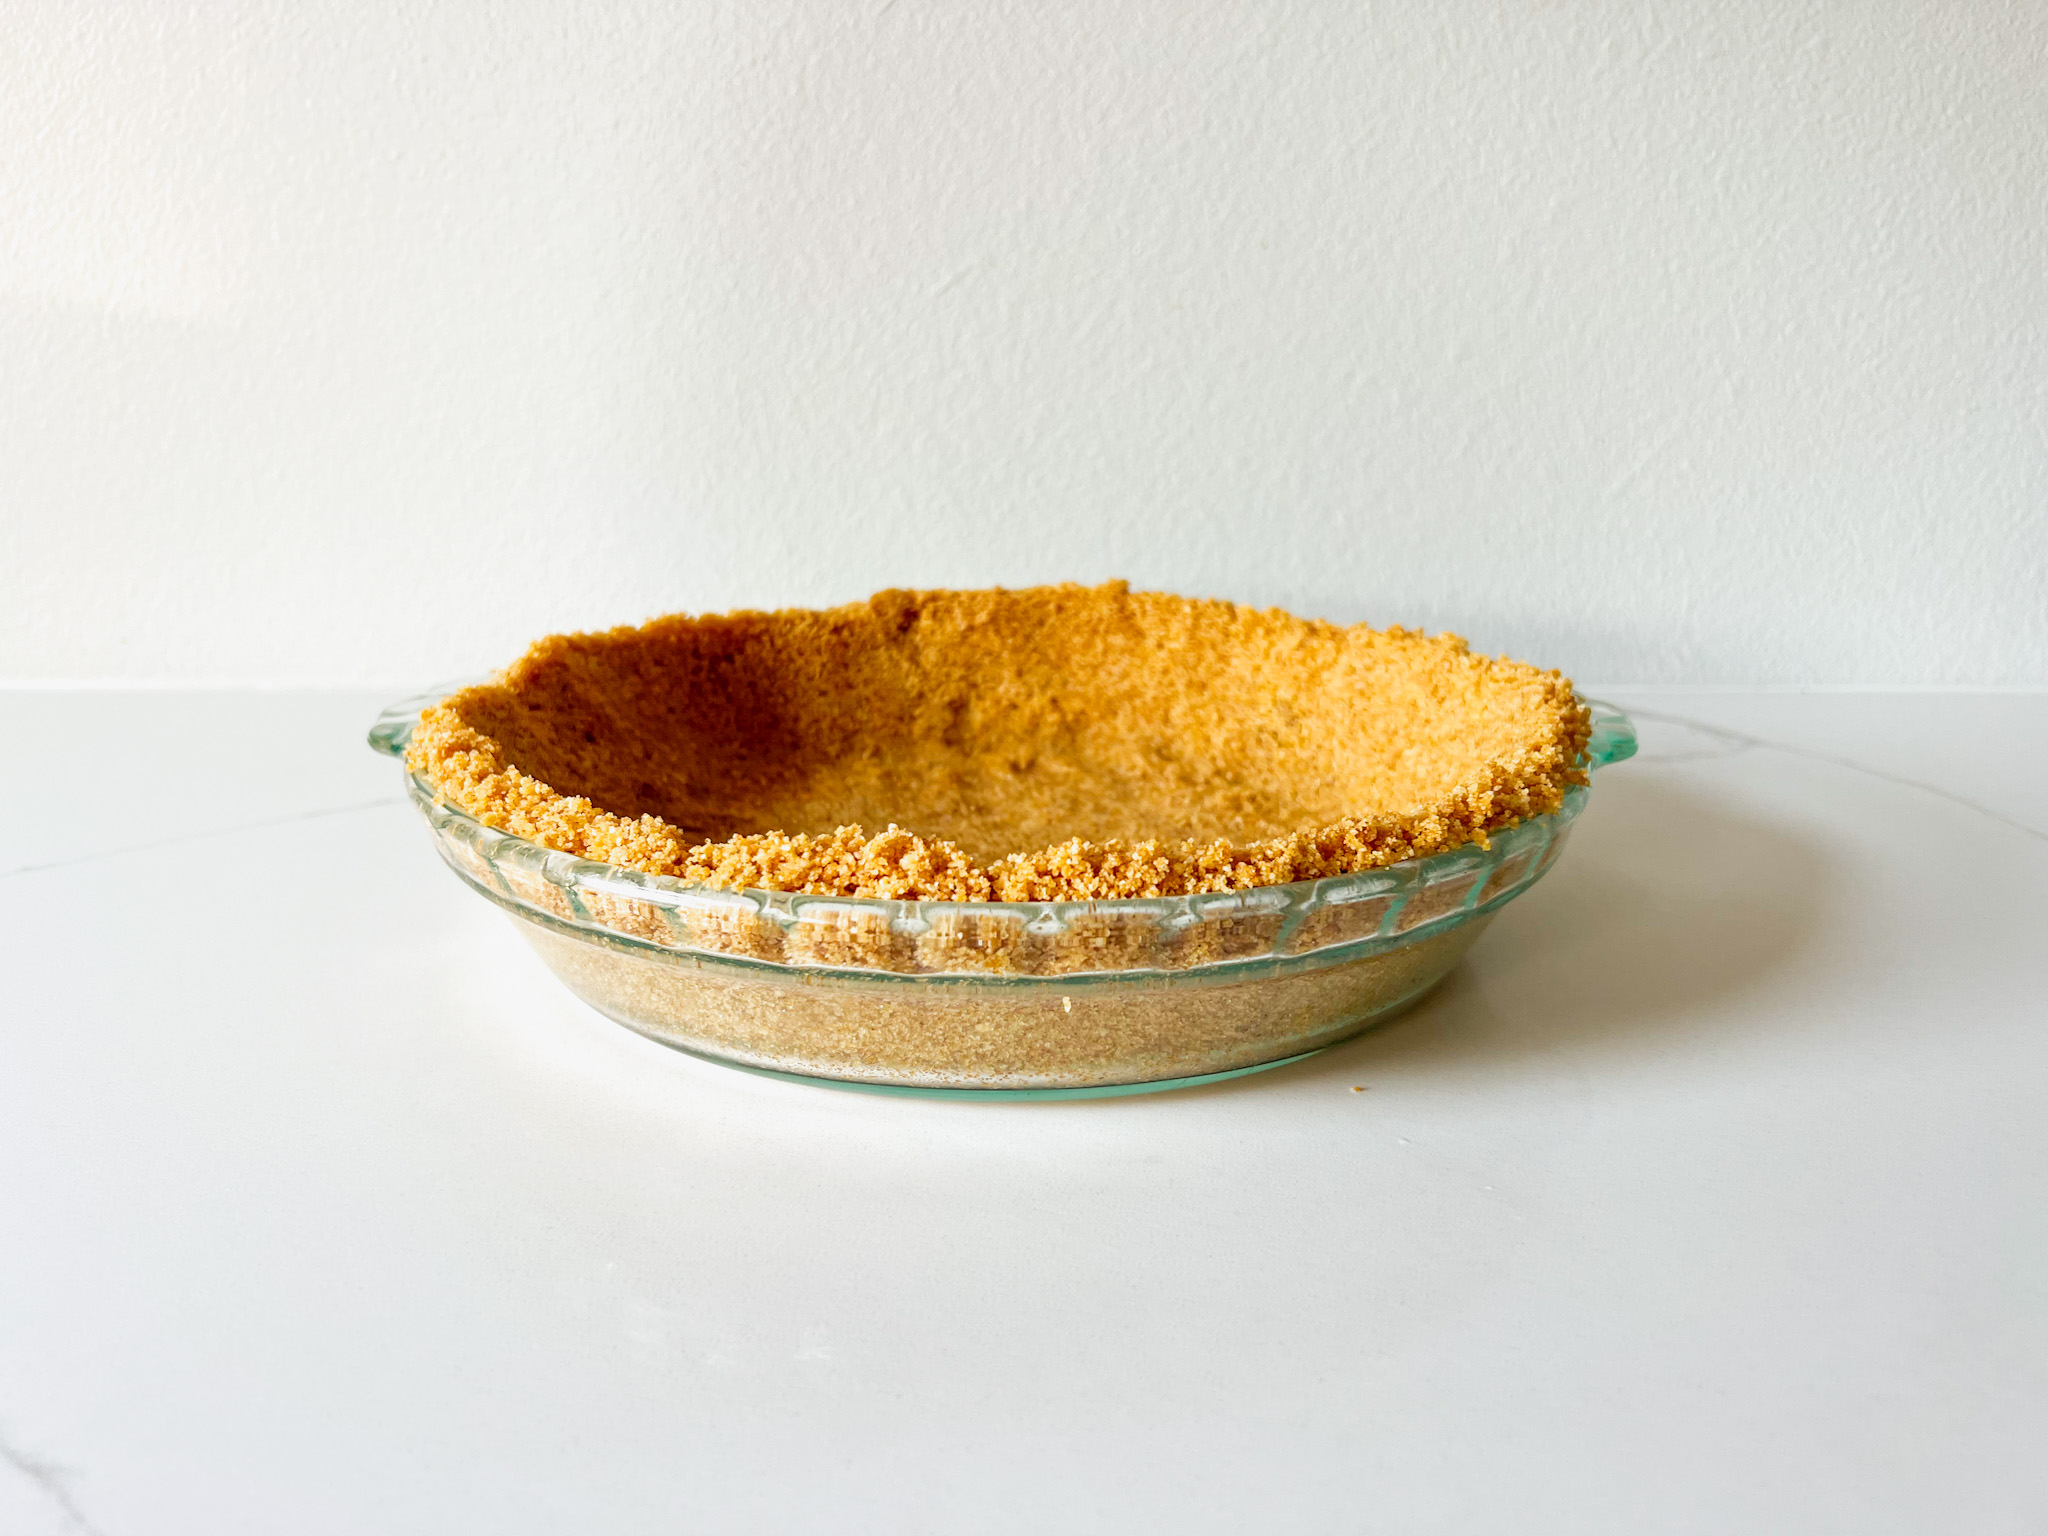 Graham cracker crust in a pie dish on a white table